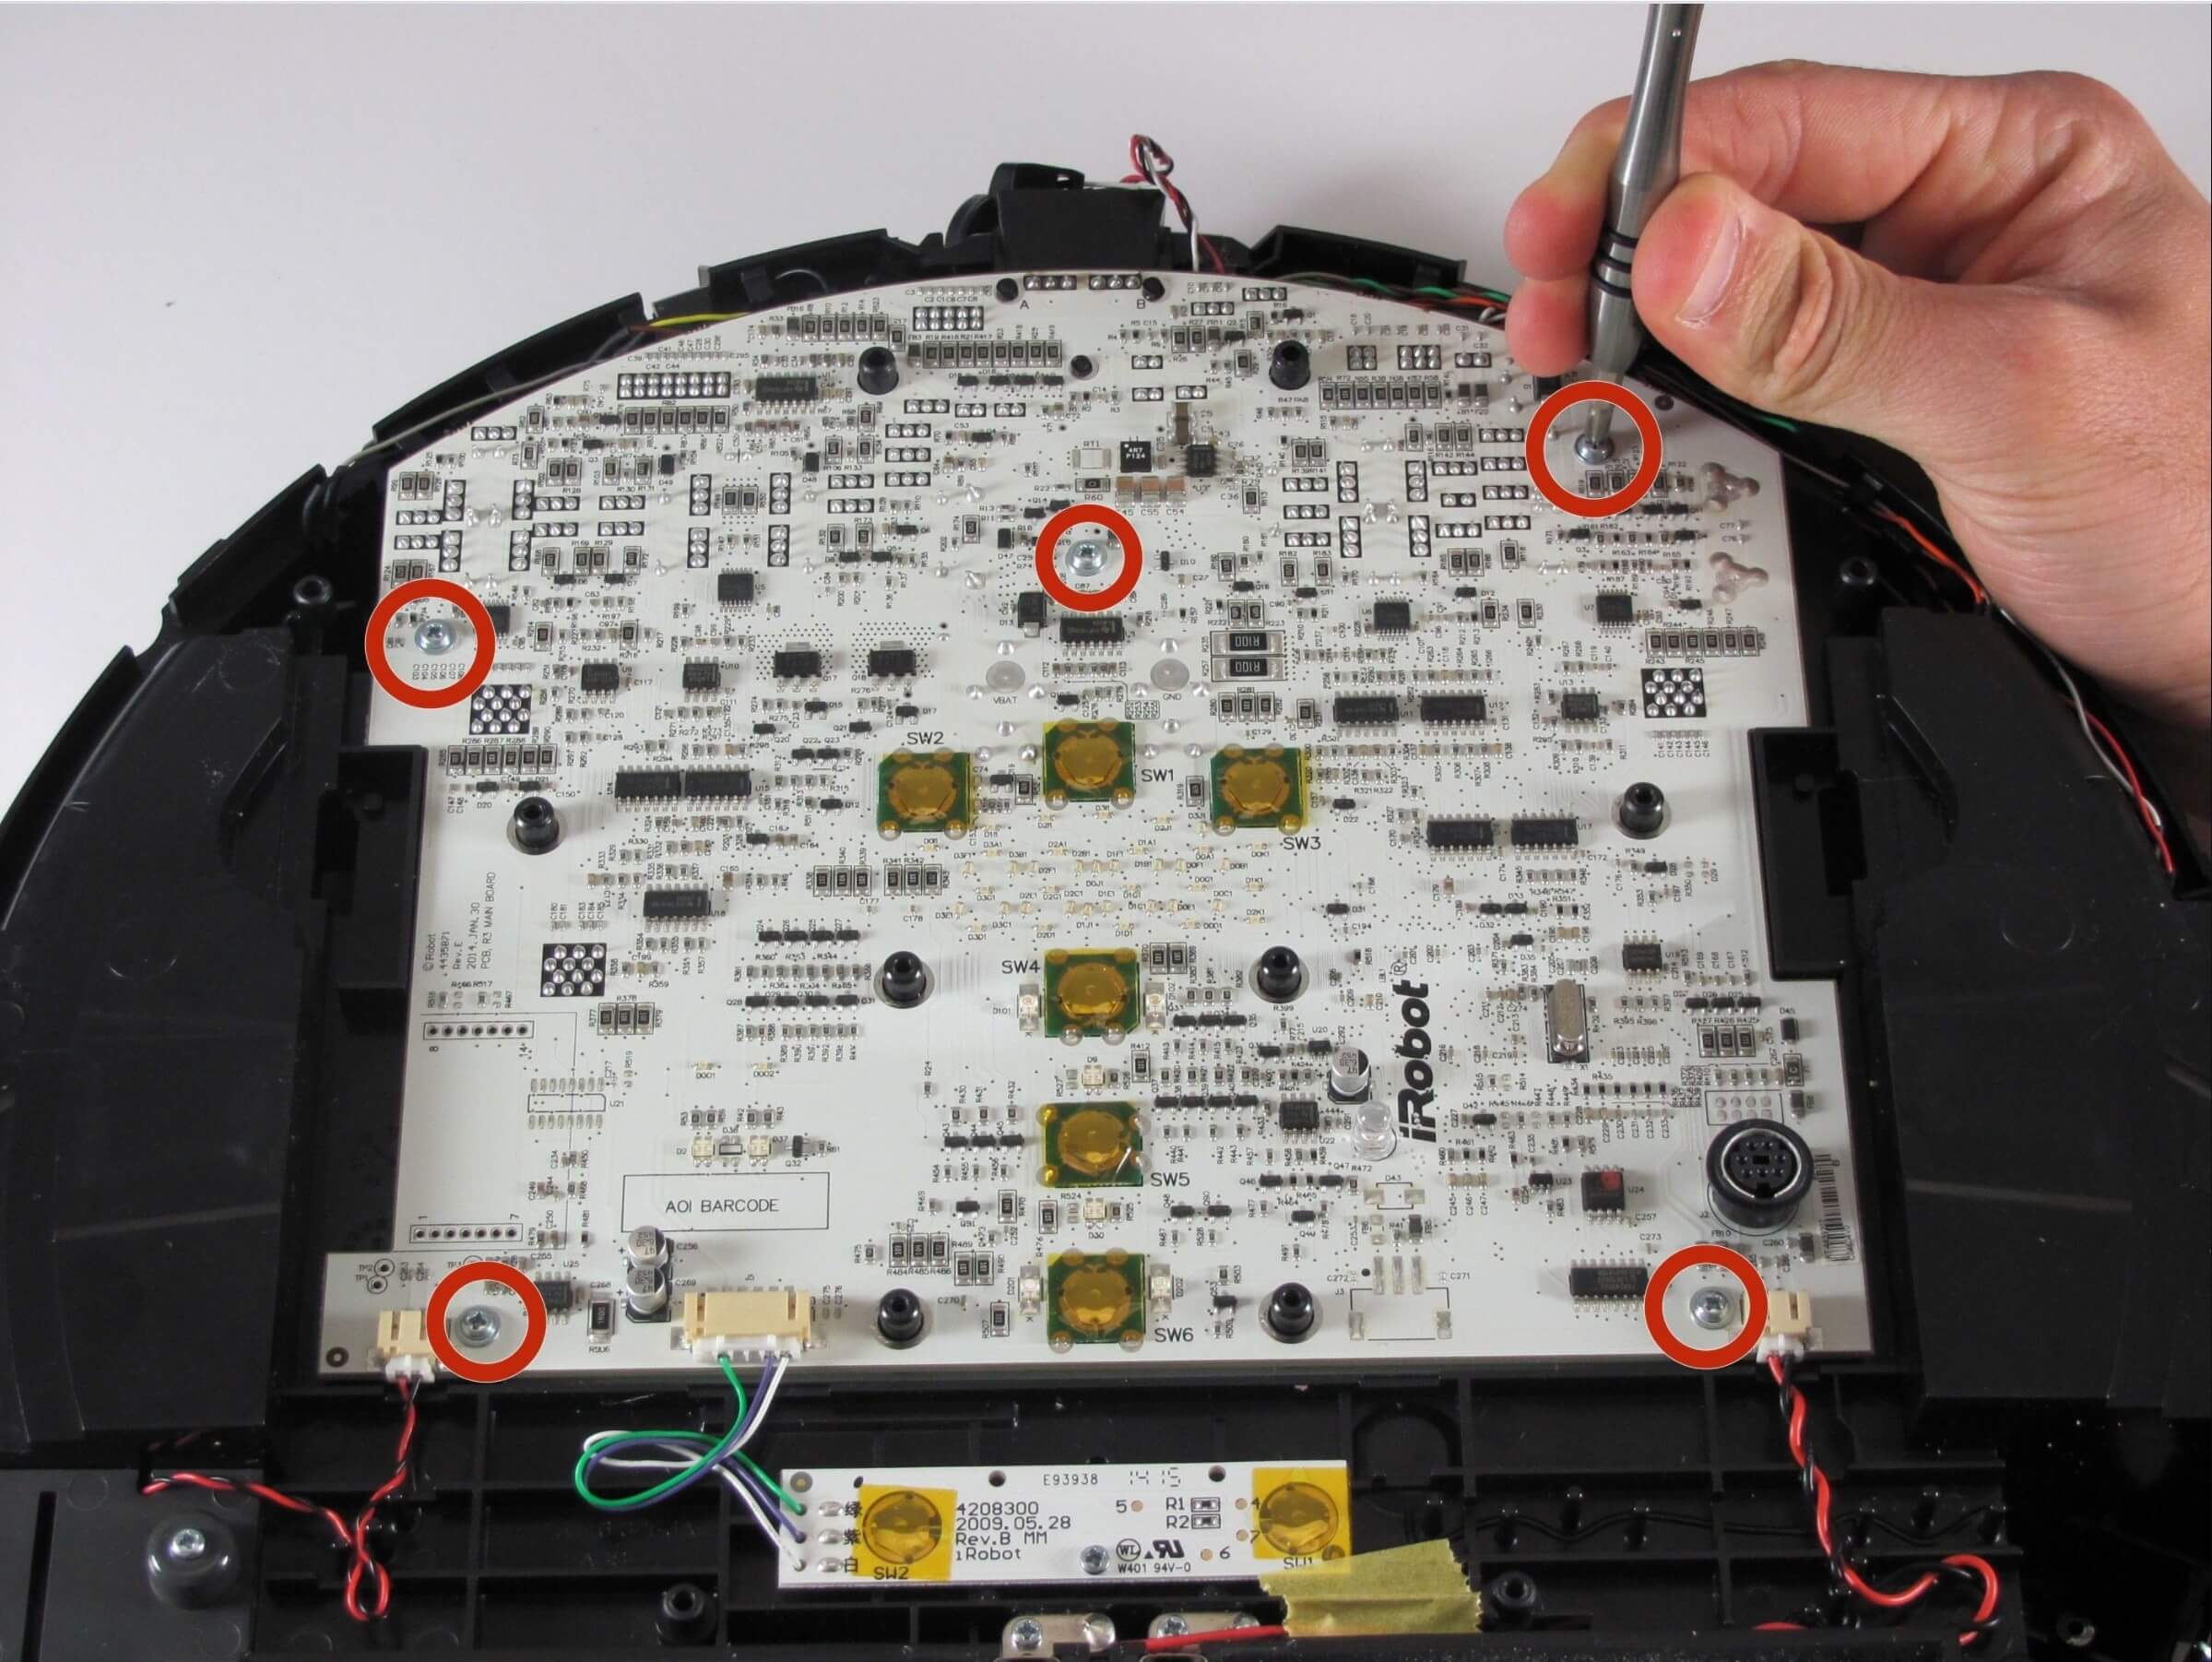 Checking Roomba motherboard